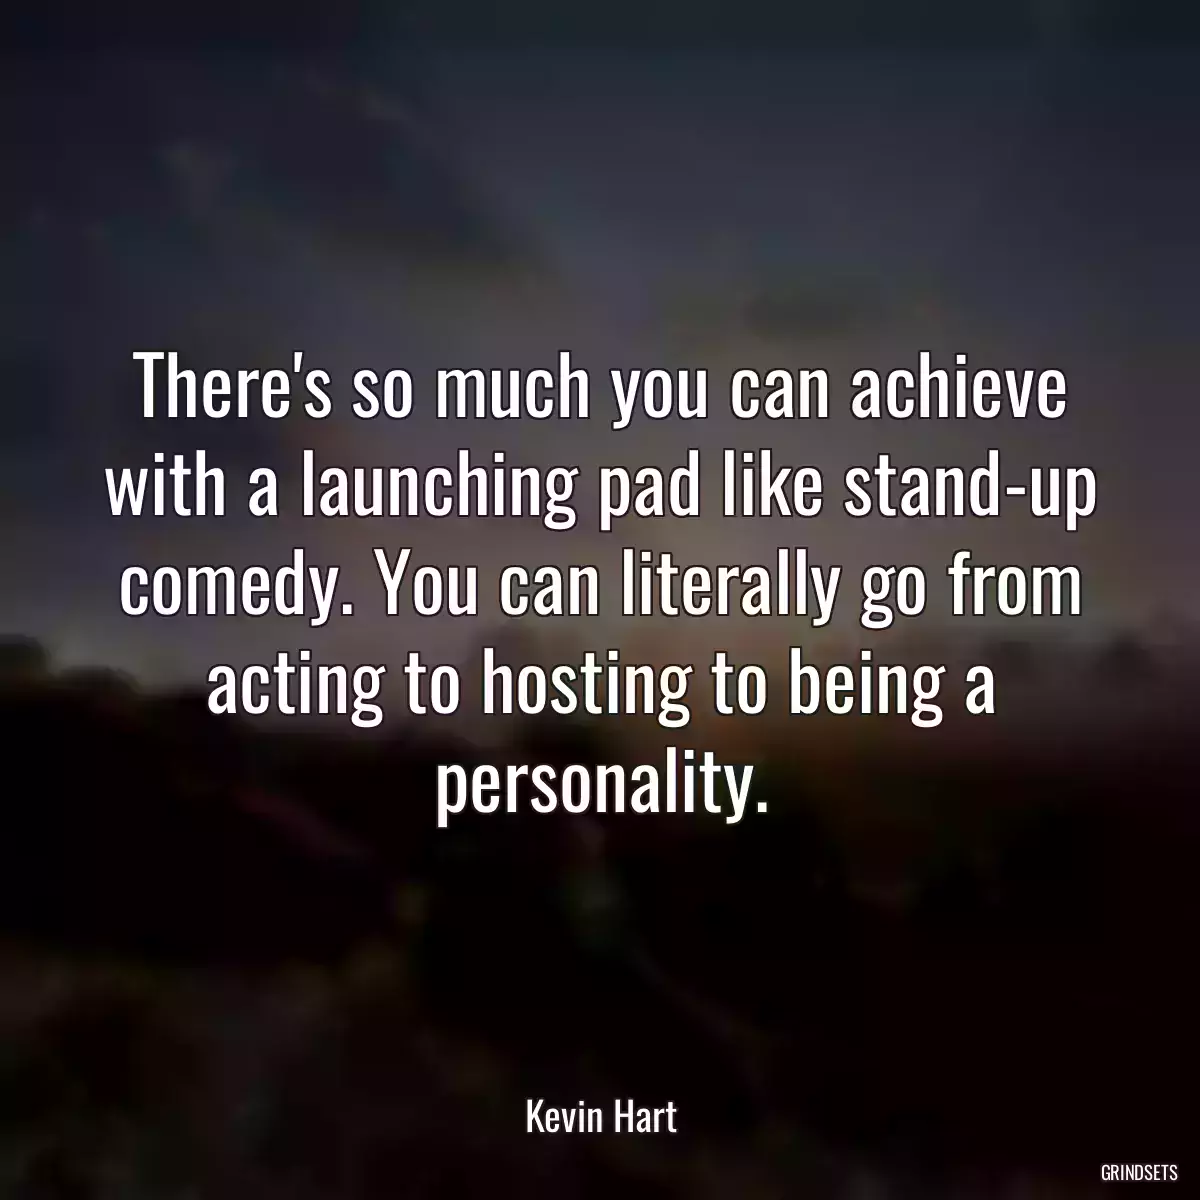 There\'s so much you can achieve with a launching pad like stand-up comedy. You can literally go from acting to hosting to being a personality.